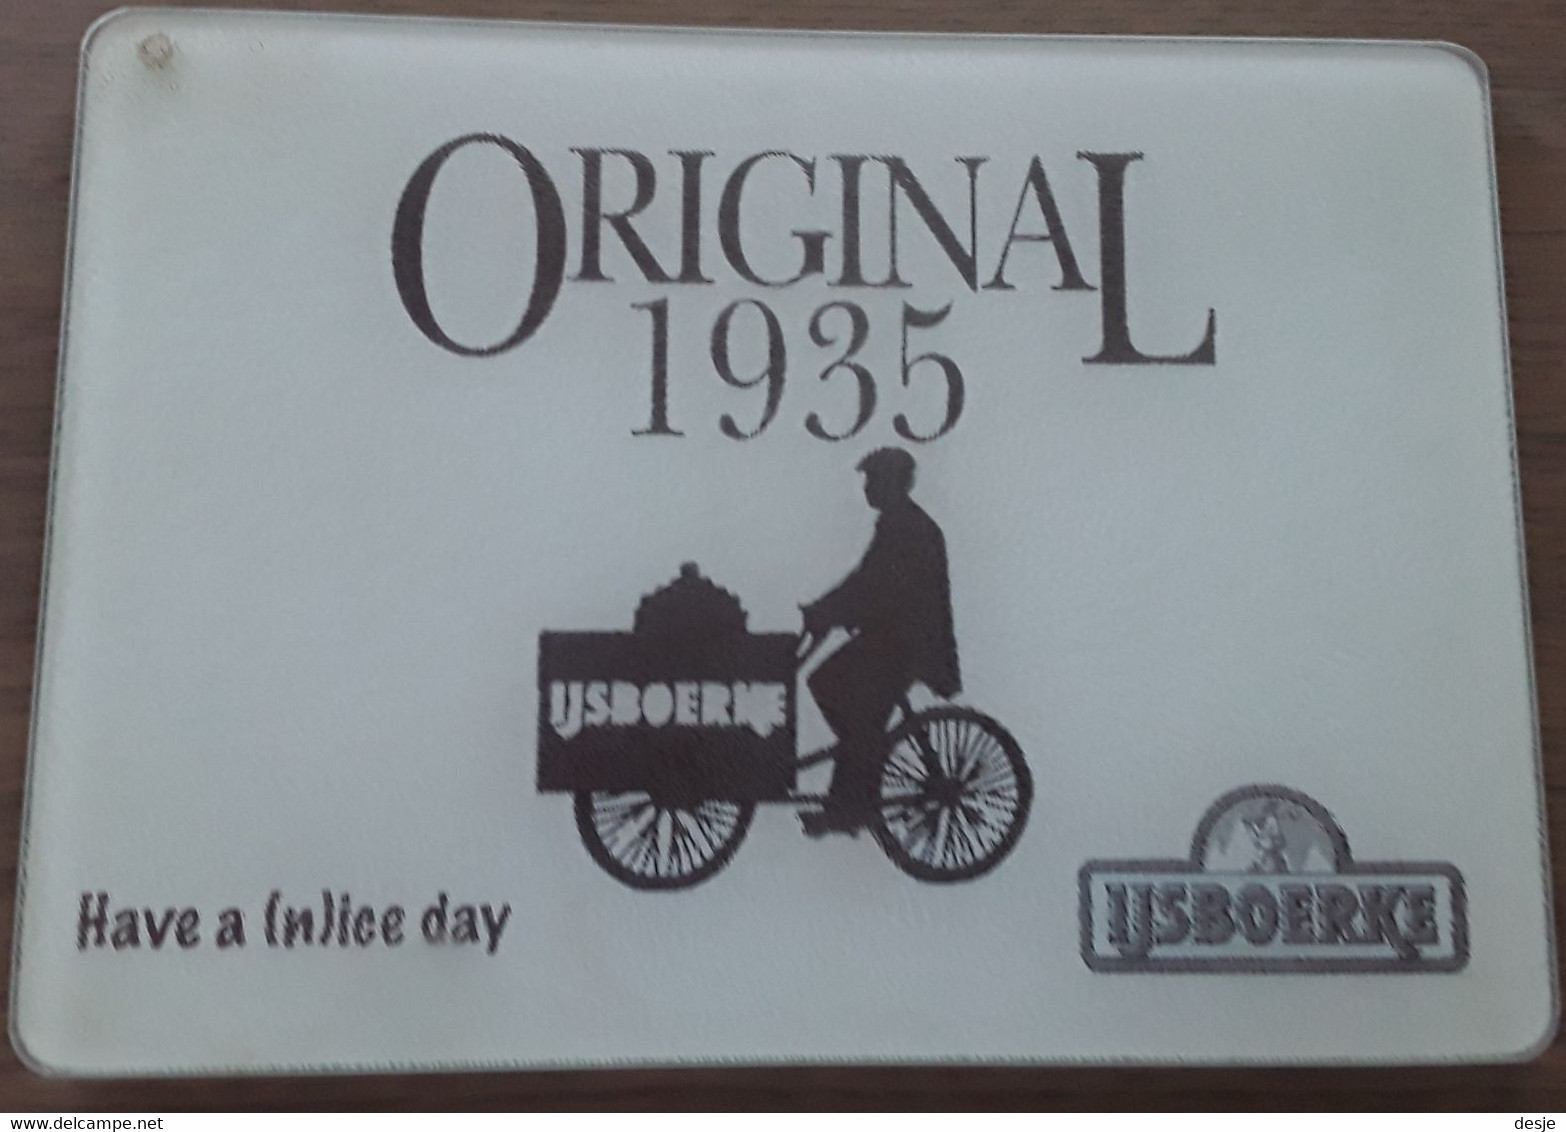 Ijsboerke Original 1935 Have A (n)ice Day - Afiches